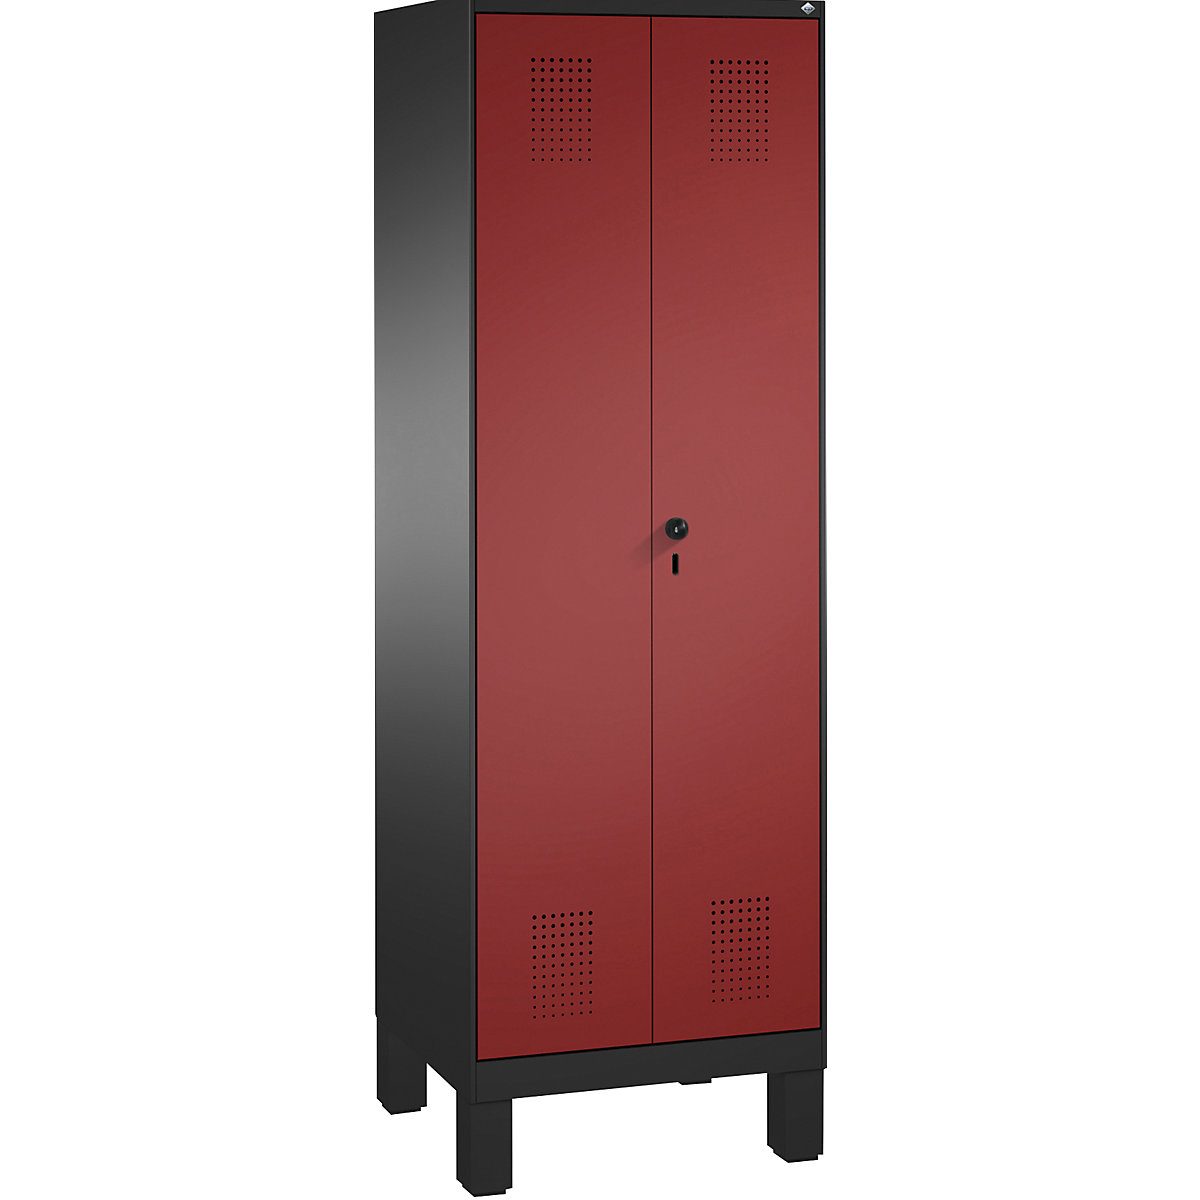 EVOLO storage cupboard, doors close in the middle, with feet – C+P, 2 compartments, 8 shelves, compartment width 300 mm, black grey / ruby red